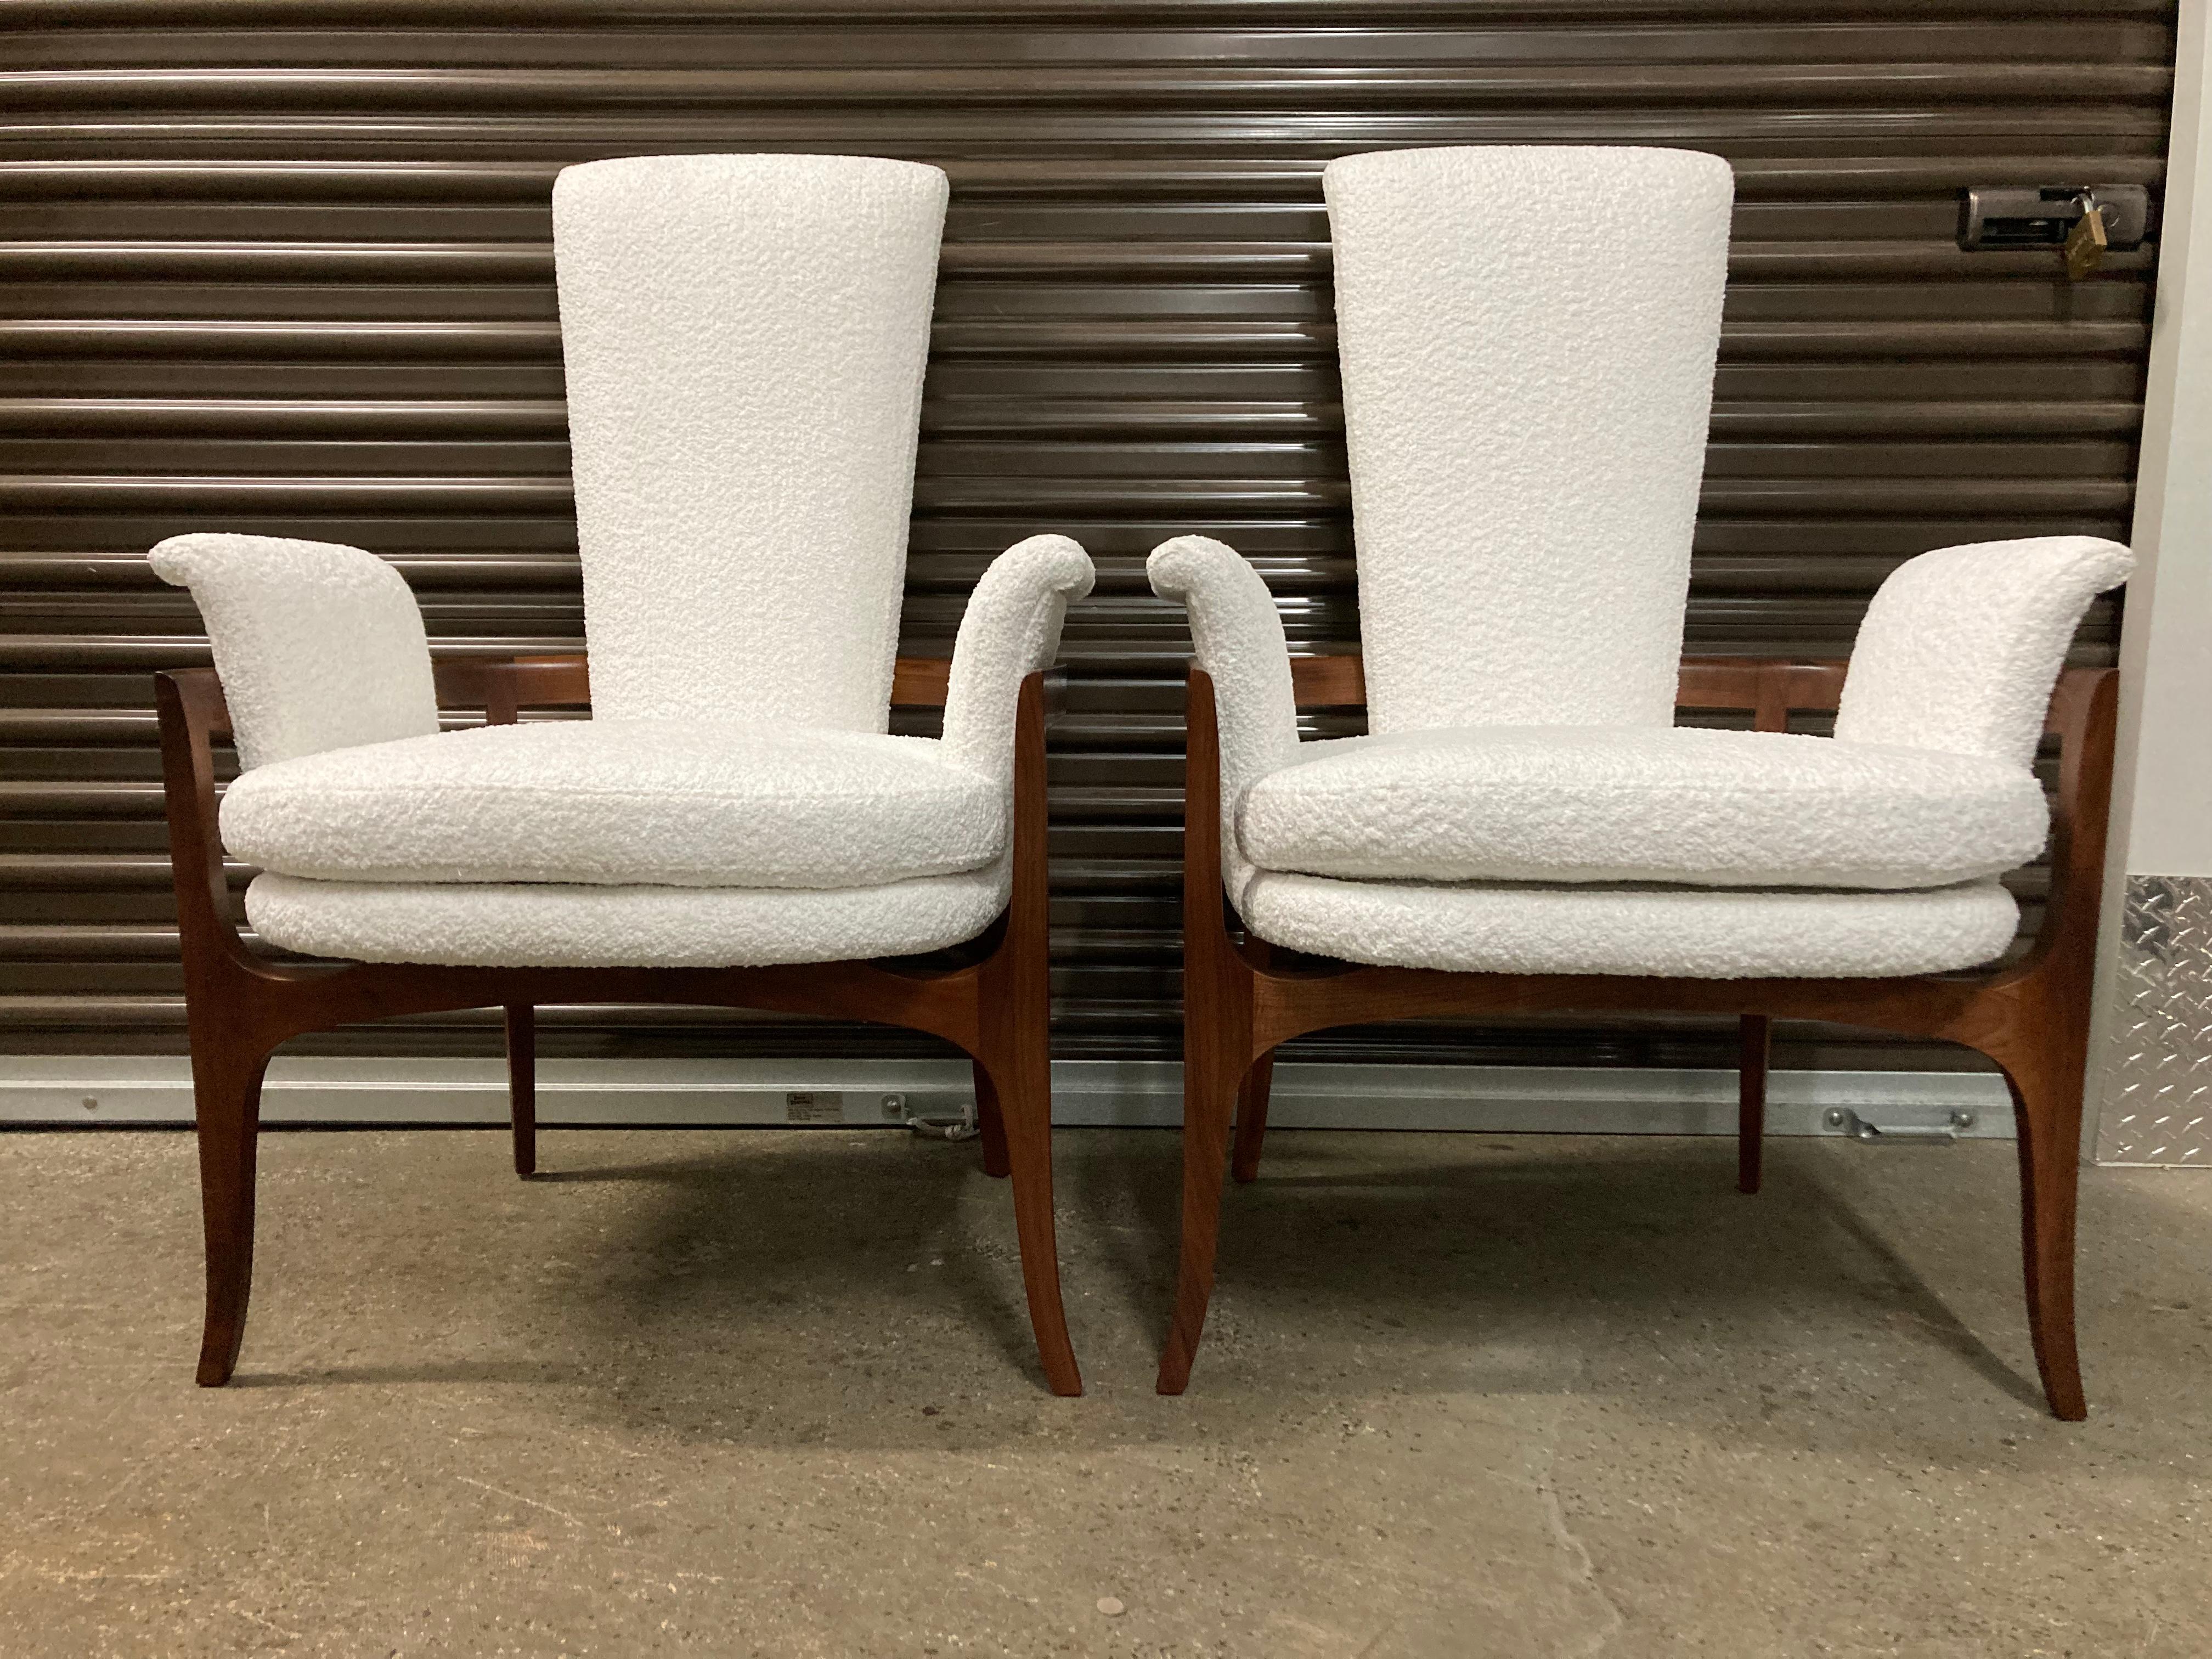 Sculptural Mid-Century Modern Lounge Chairs. 
Chairs have solid walnut legs, seats are recovered in white boucle fabric. Ready for a new home.